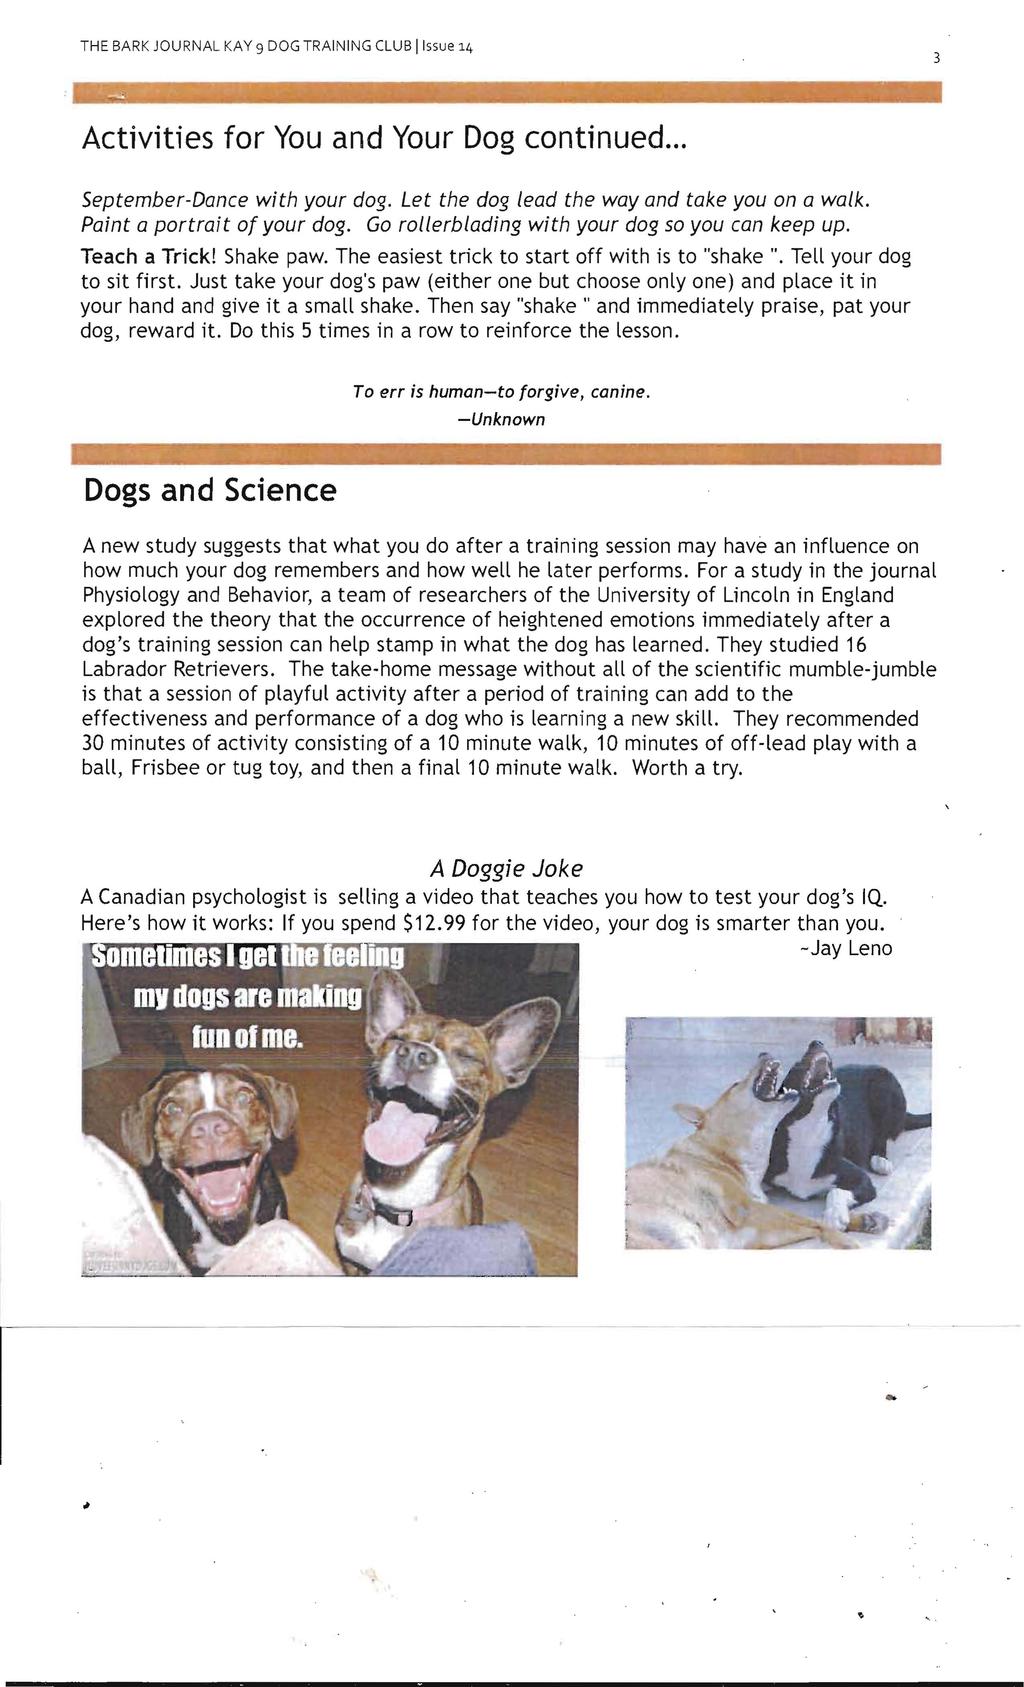 THE BARK JOURNAL KAY 9 DOG TRAINING CLUB Iissue 14 3 Activities for You and Your Dog continued. September-Dance with your dog. Let the dog lead the way and take you on a walk.